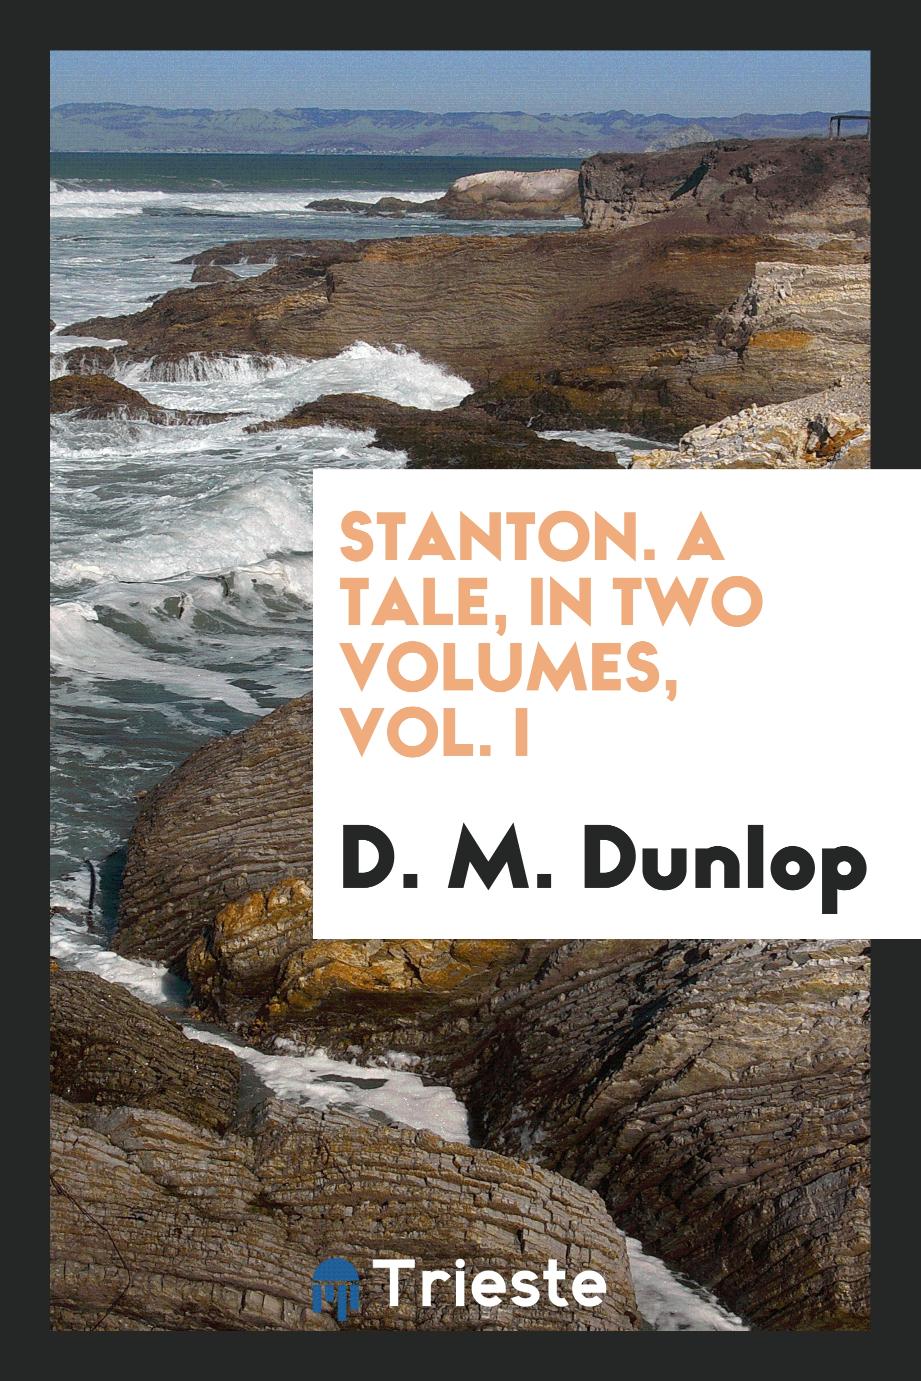 Stanton. A Tale, in Two Volumes, Vol. I